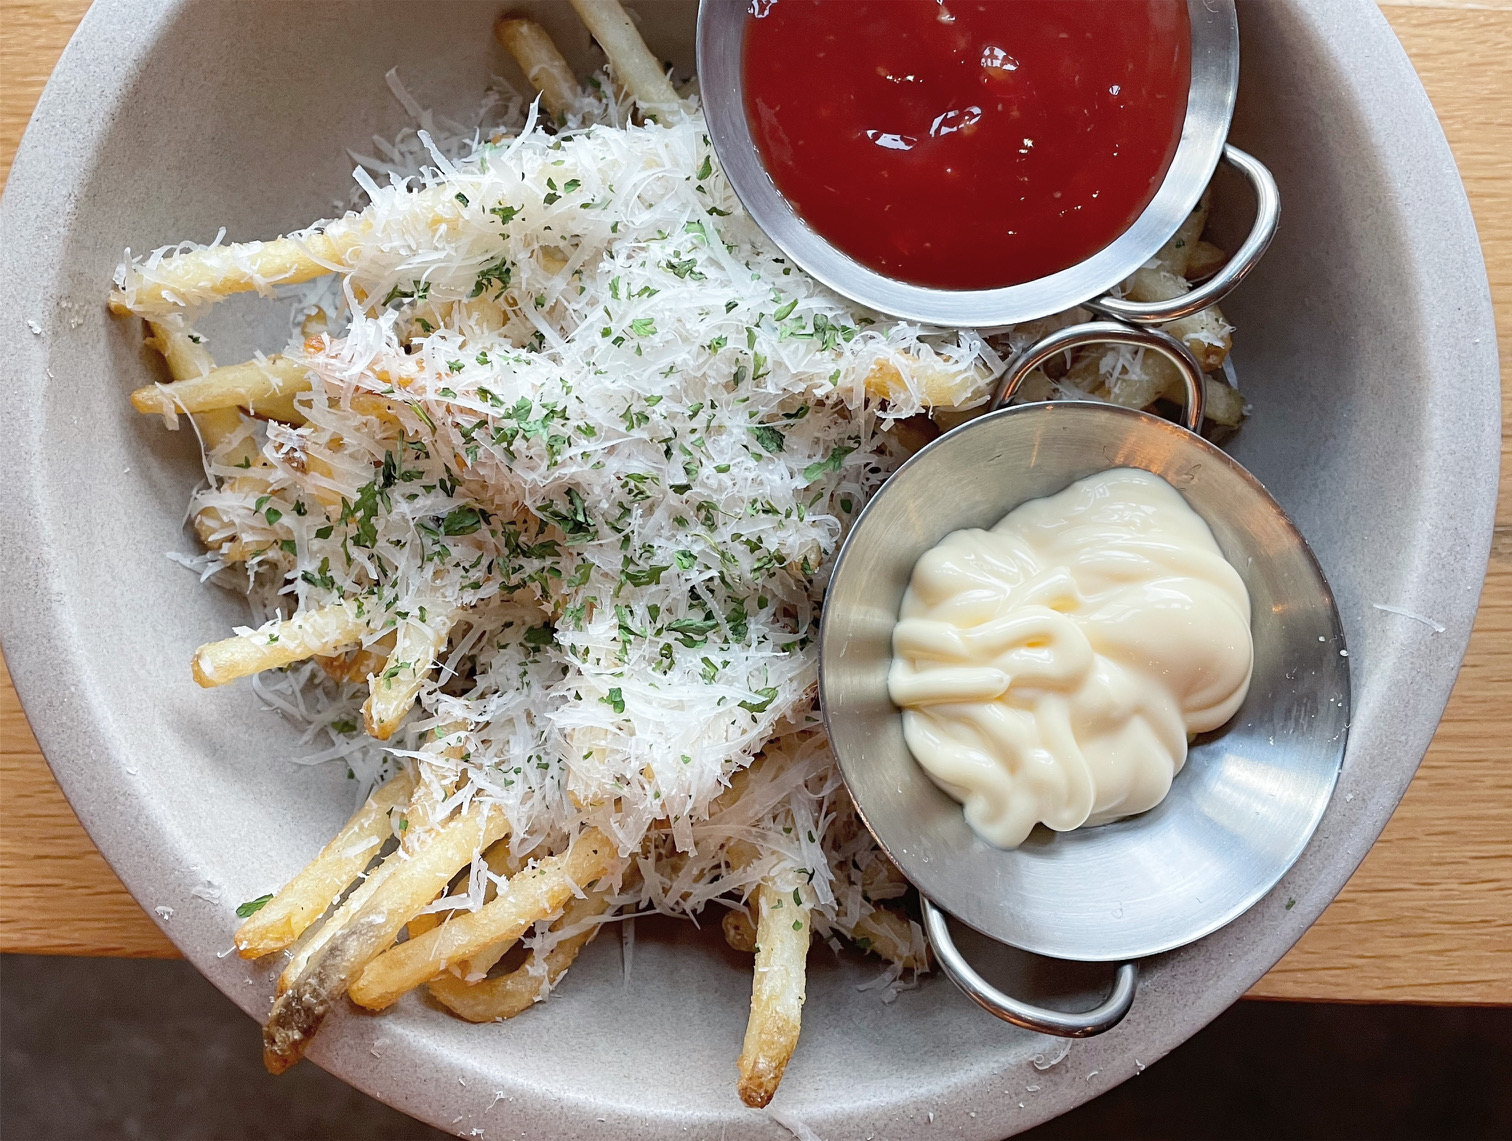 An overhead photo shows a gray bowl filled with skinny fries covered in Parmesan grated cheese with two little cups of sauce: one red and one white. Photo by Alyssa Buckley.